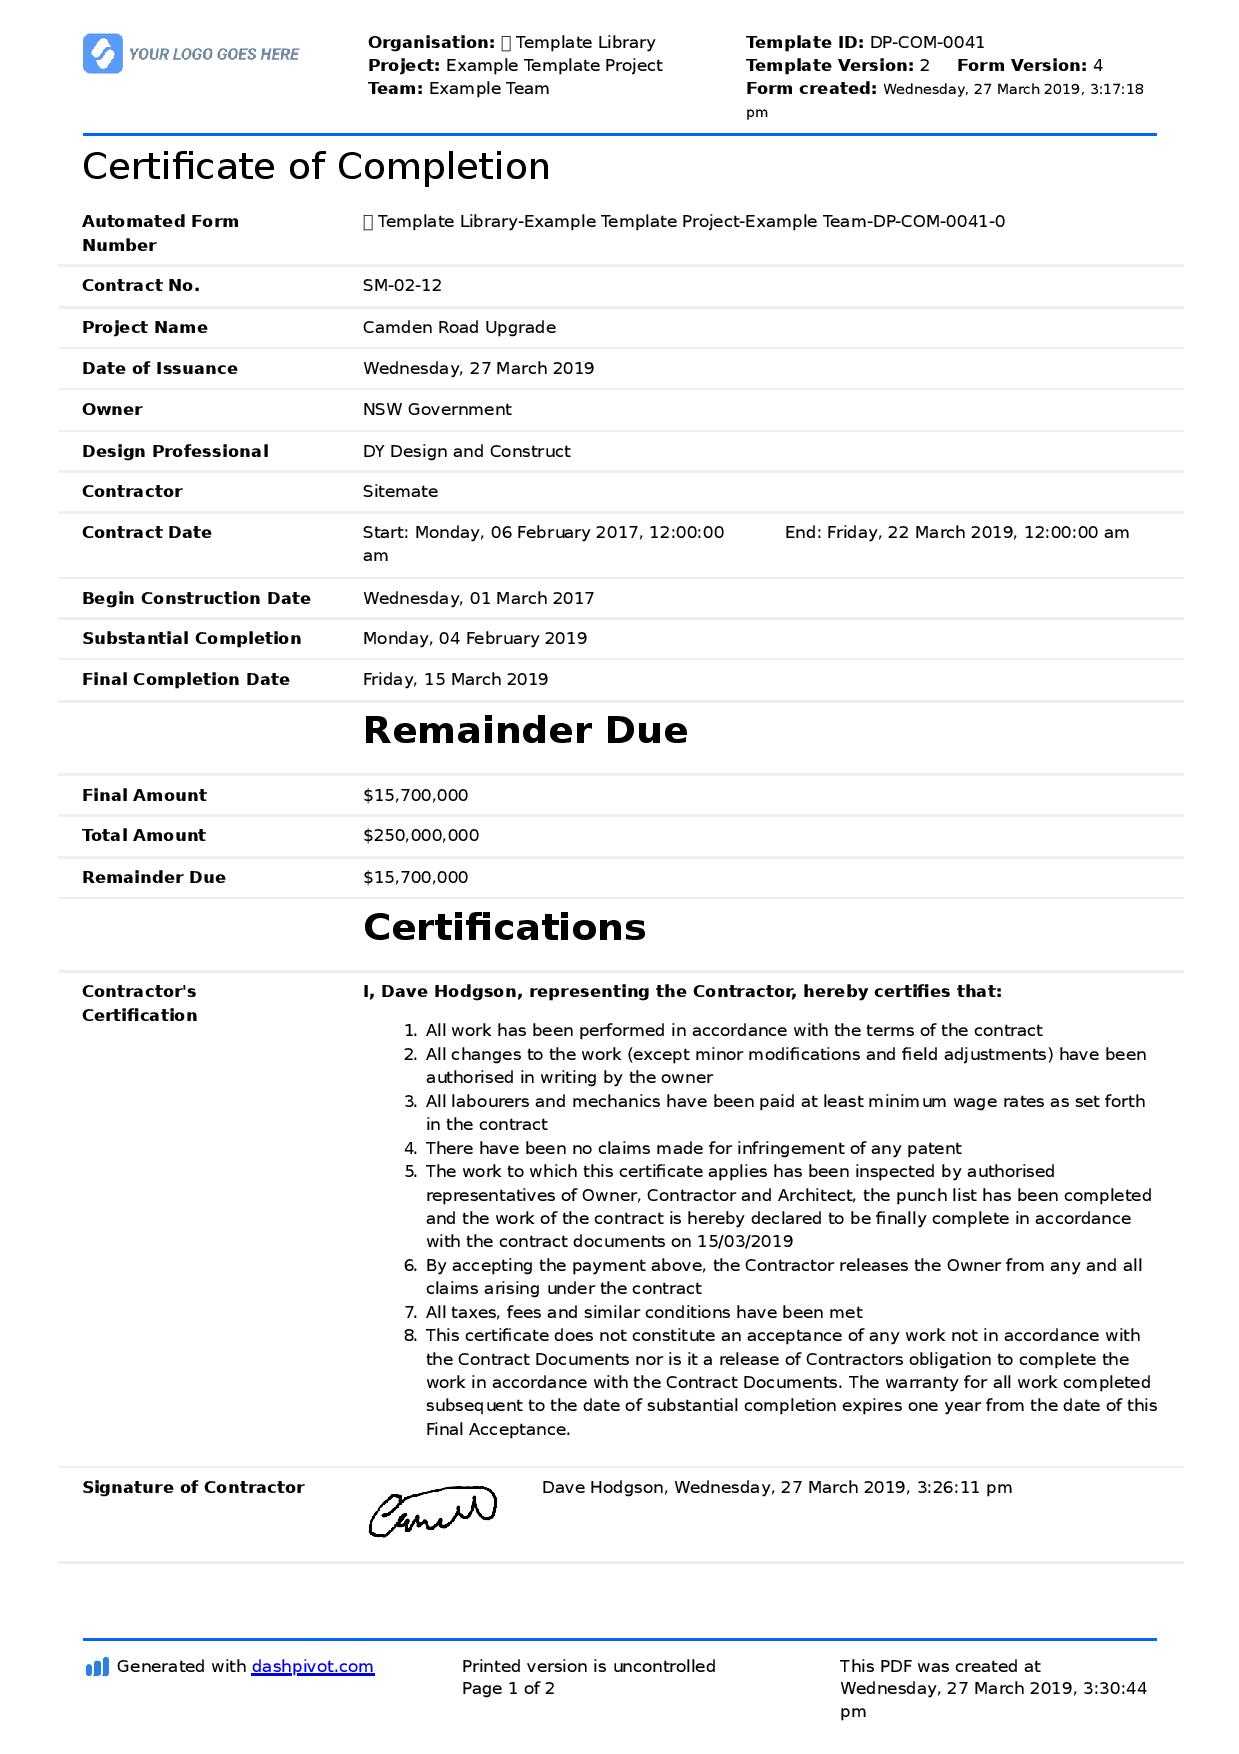 Certificate Of Completion For Construction (Free Template + Pertaining To Construction Certificate Of Completion Template